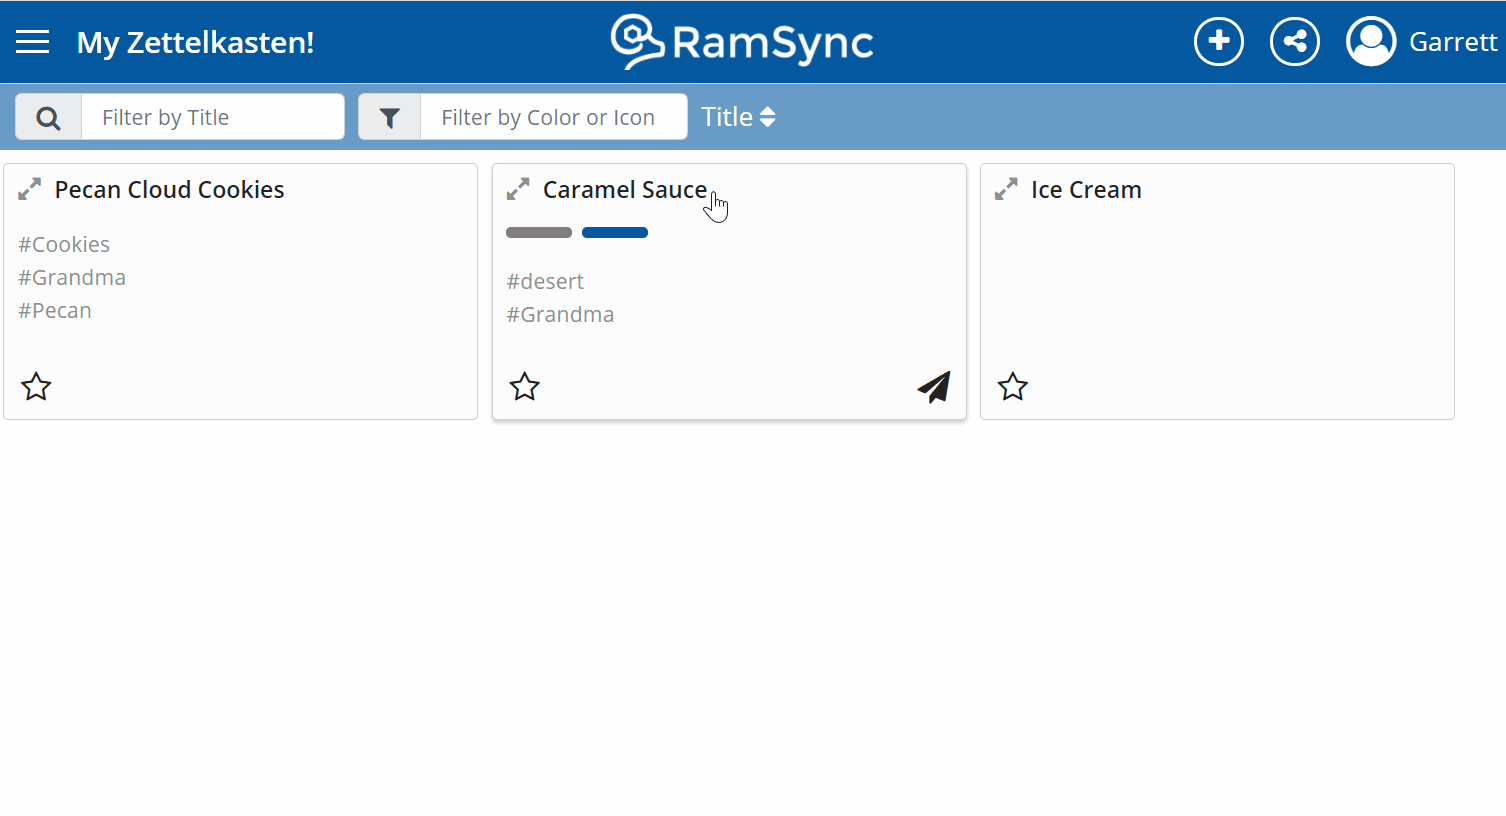 Type @ and a Note title to make a connection. Fast and easy with RamSync!